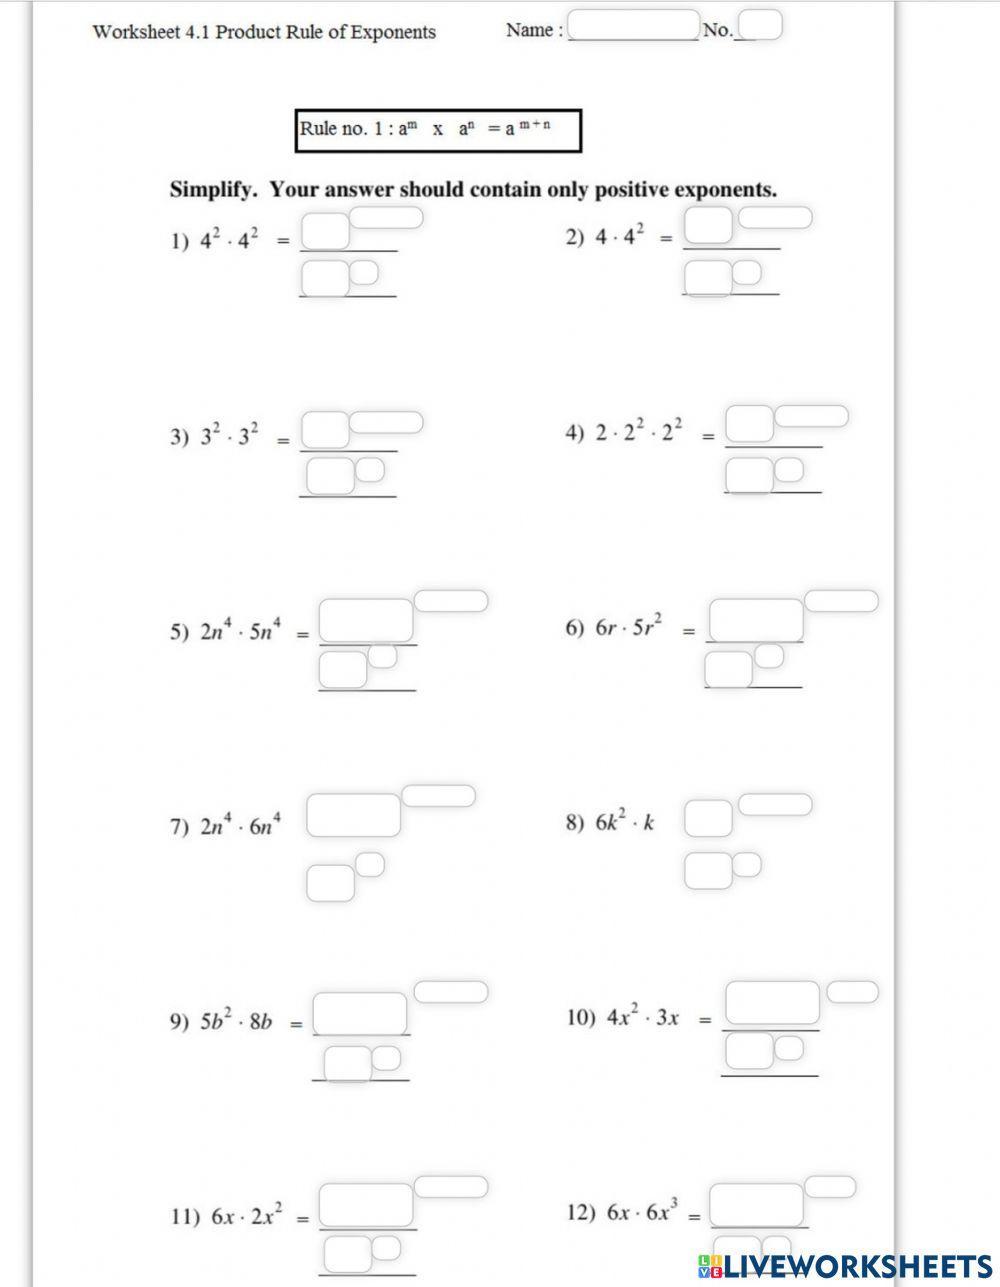 Worksheet 4.1 Product rule of exponents